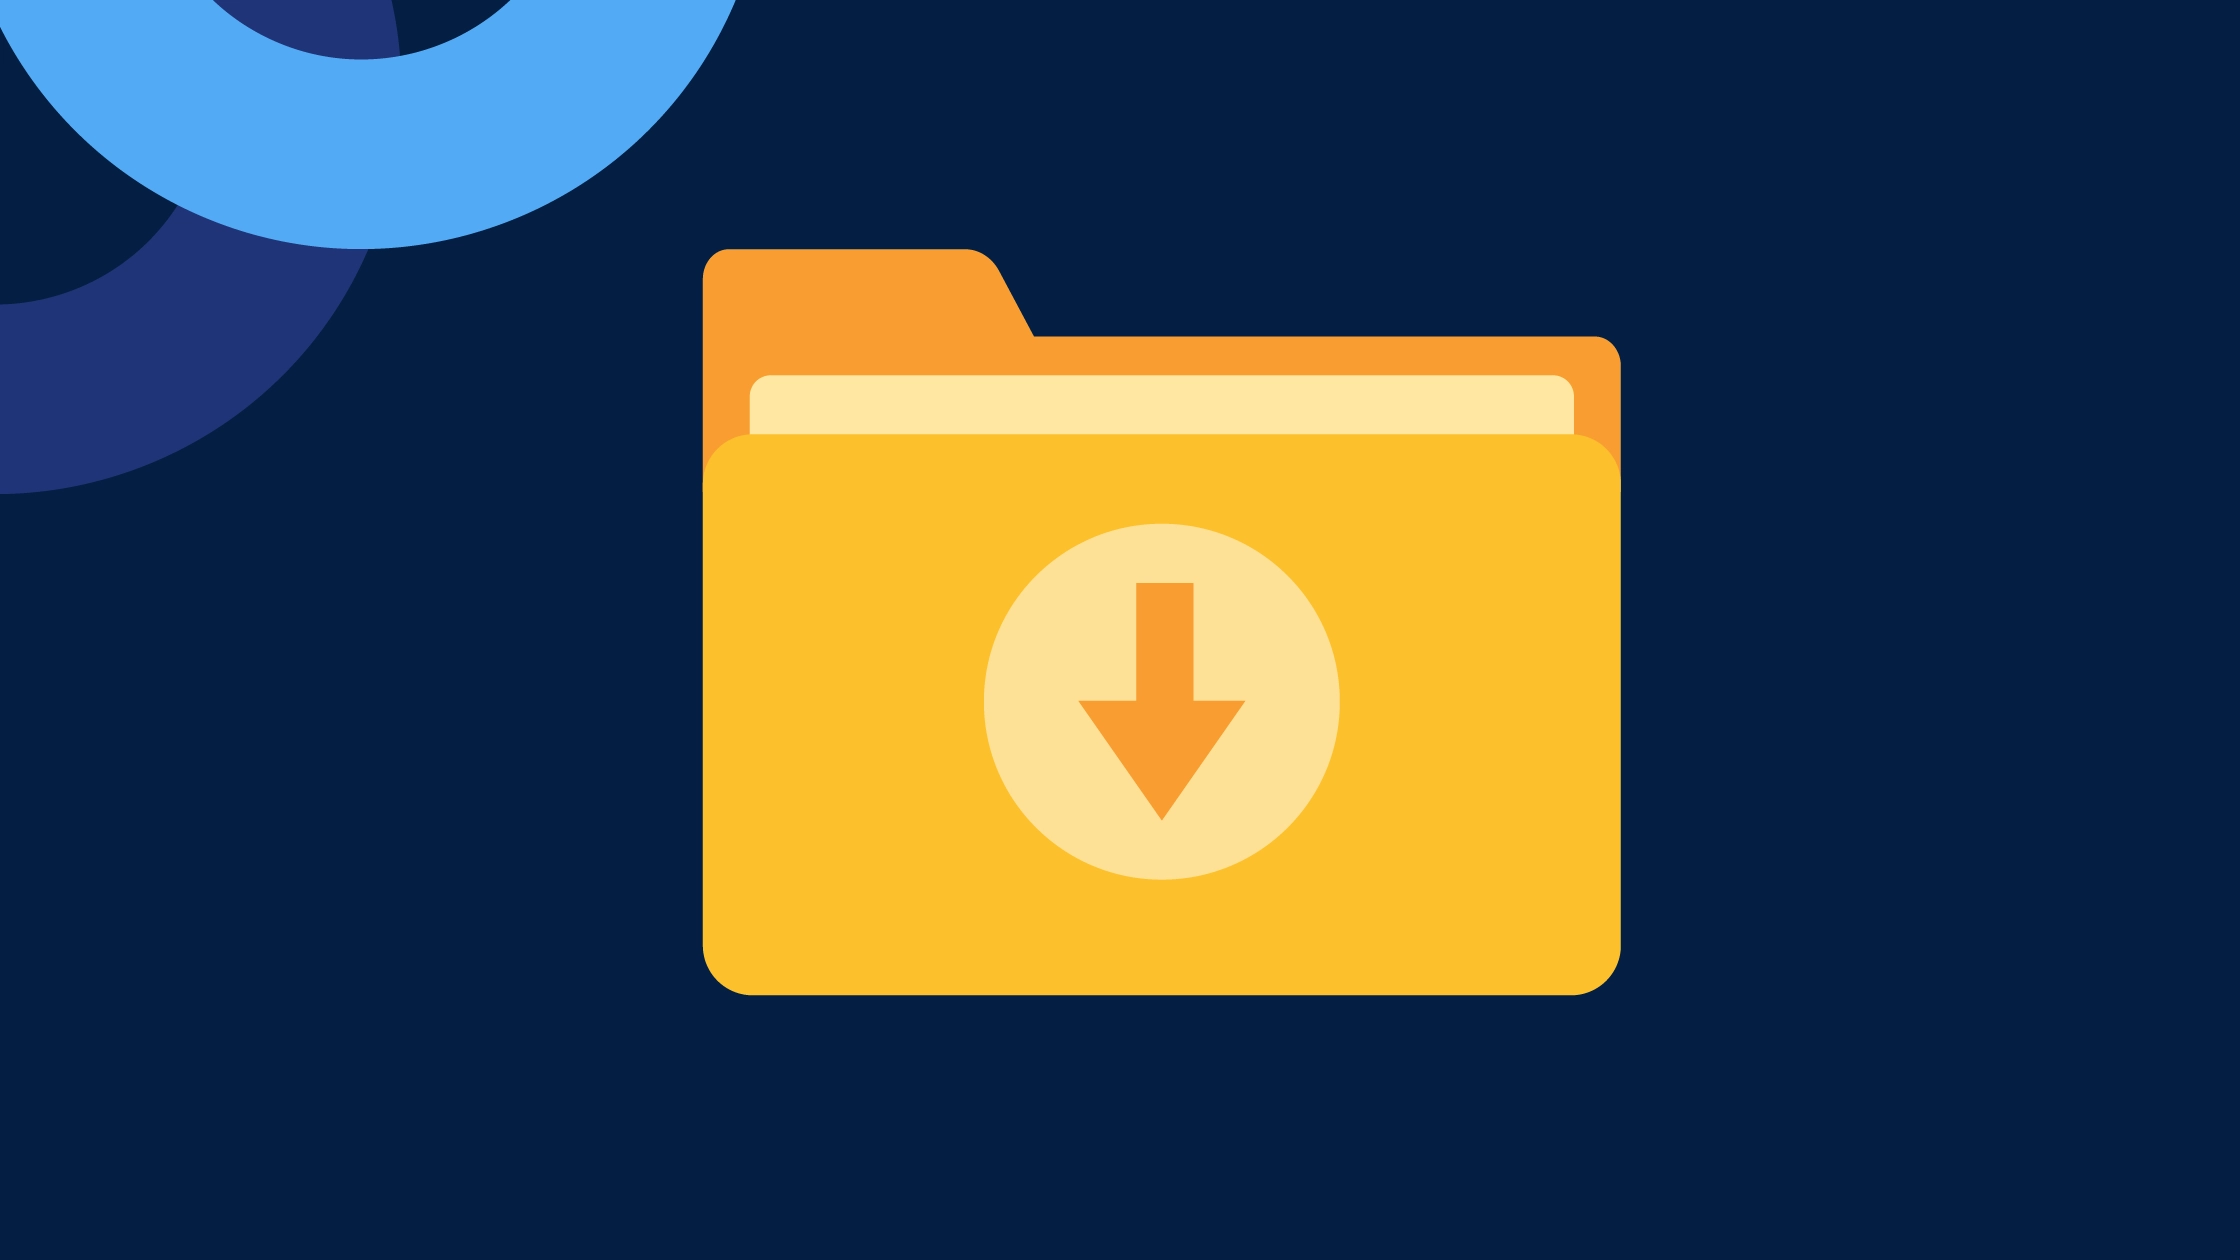 Navy blue background with a yellow folder icon with an arrow pointing down to signify downloading a folder